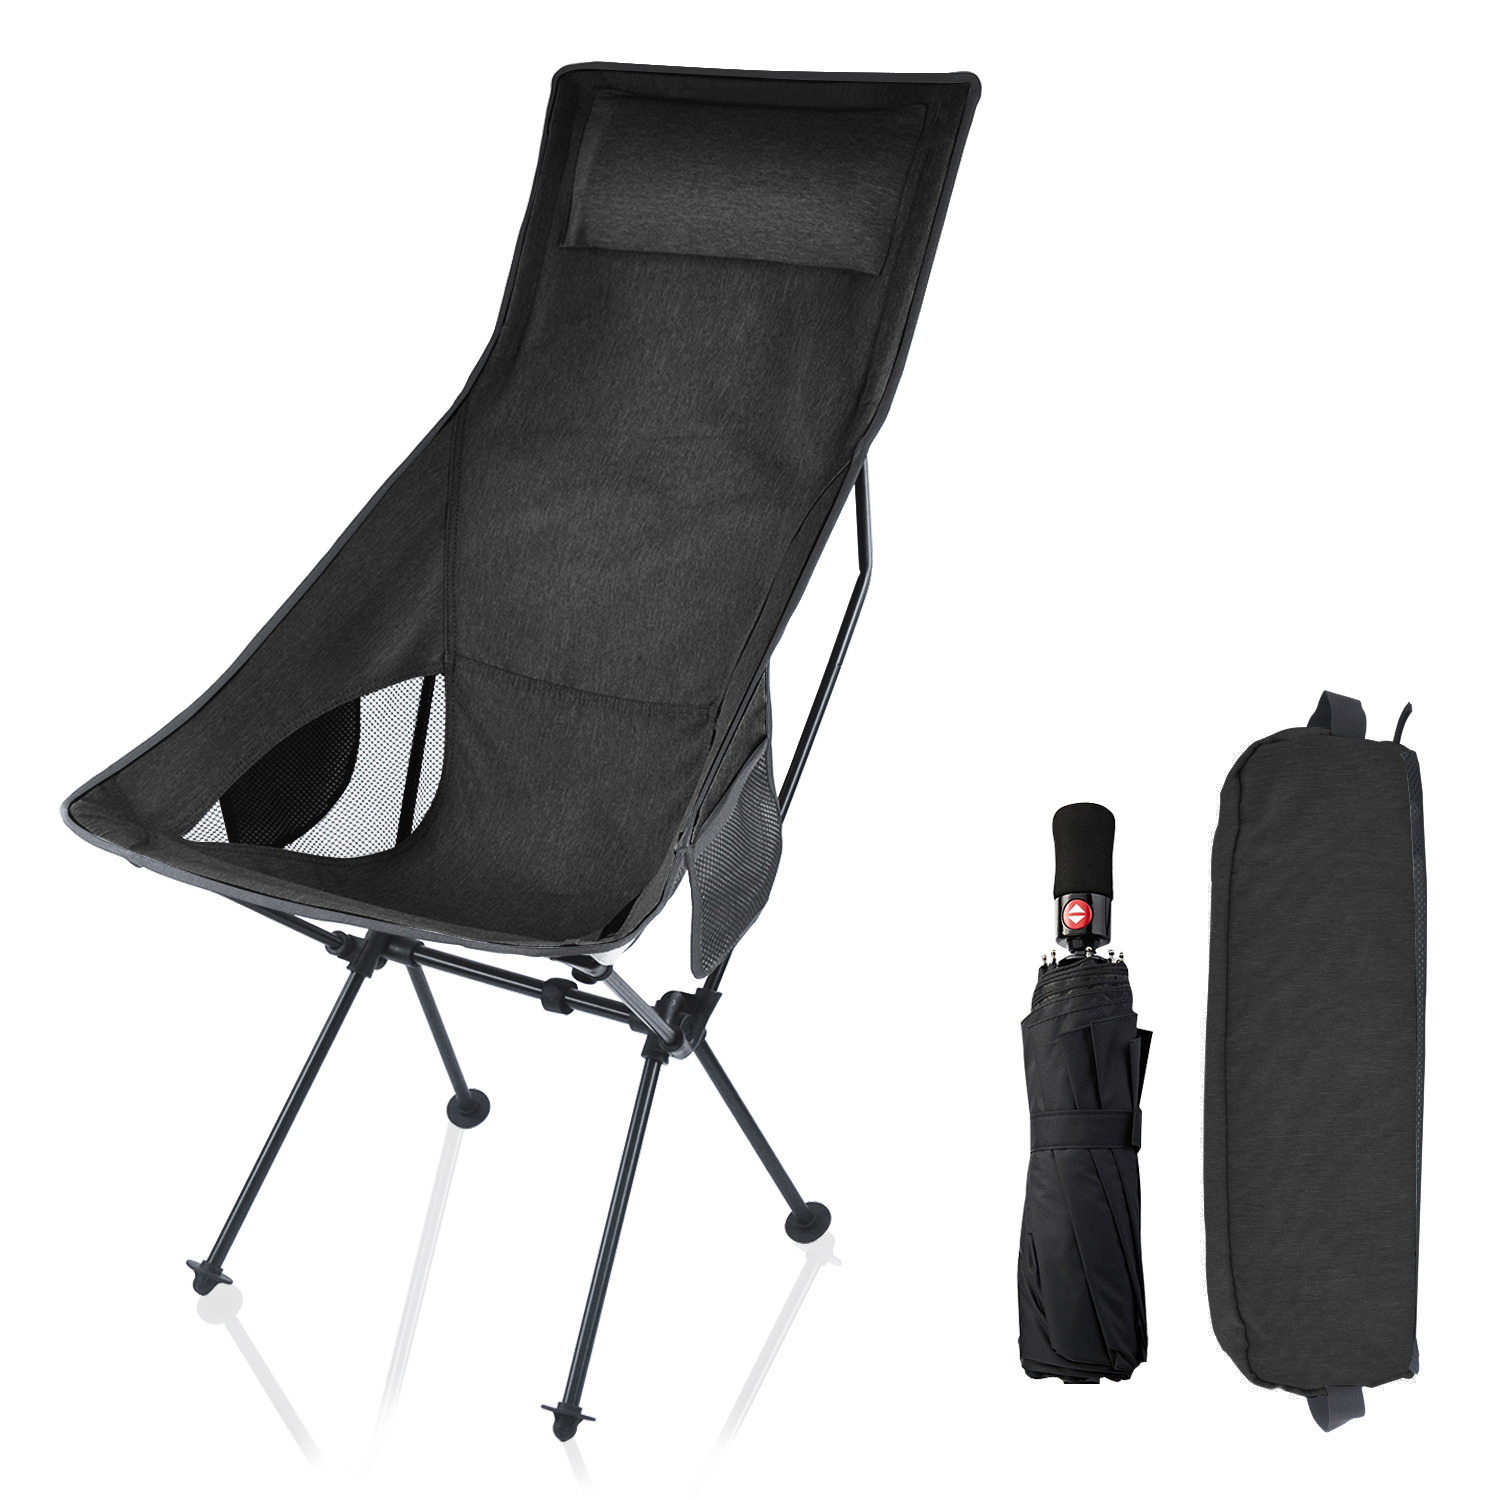 Portable beach fishing recliner outdoor foldable camping chair